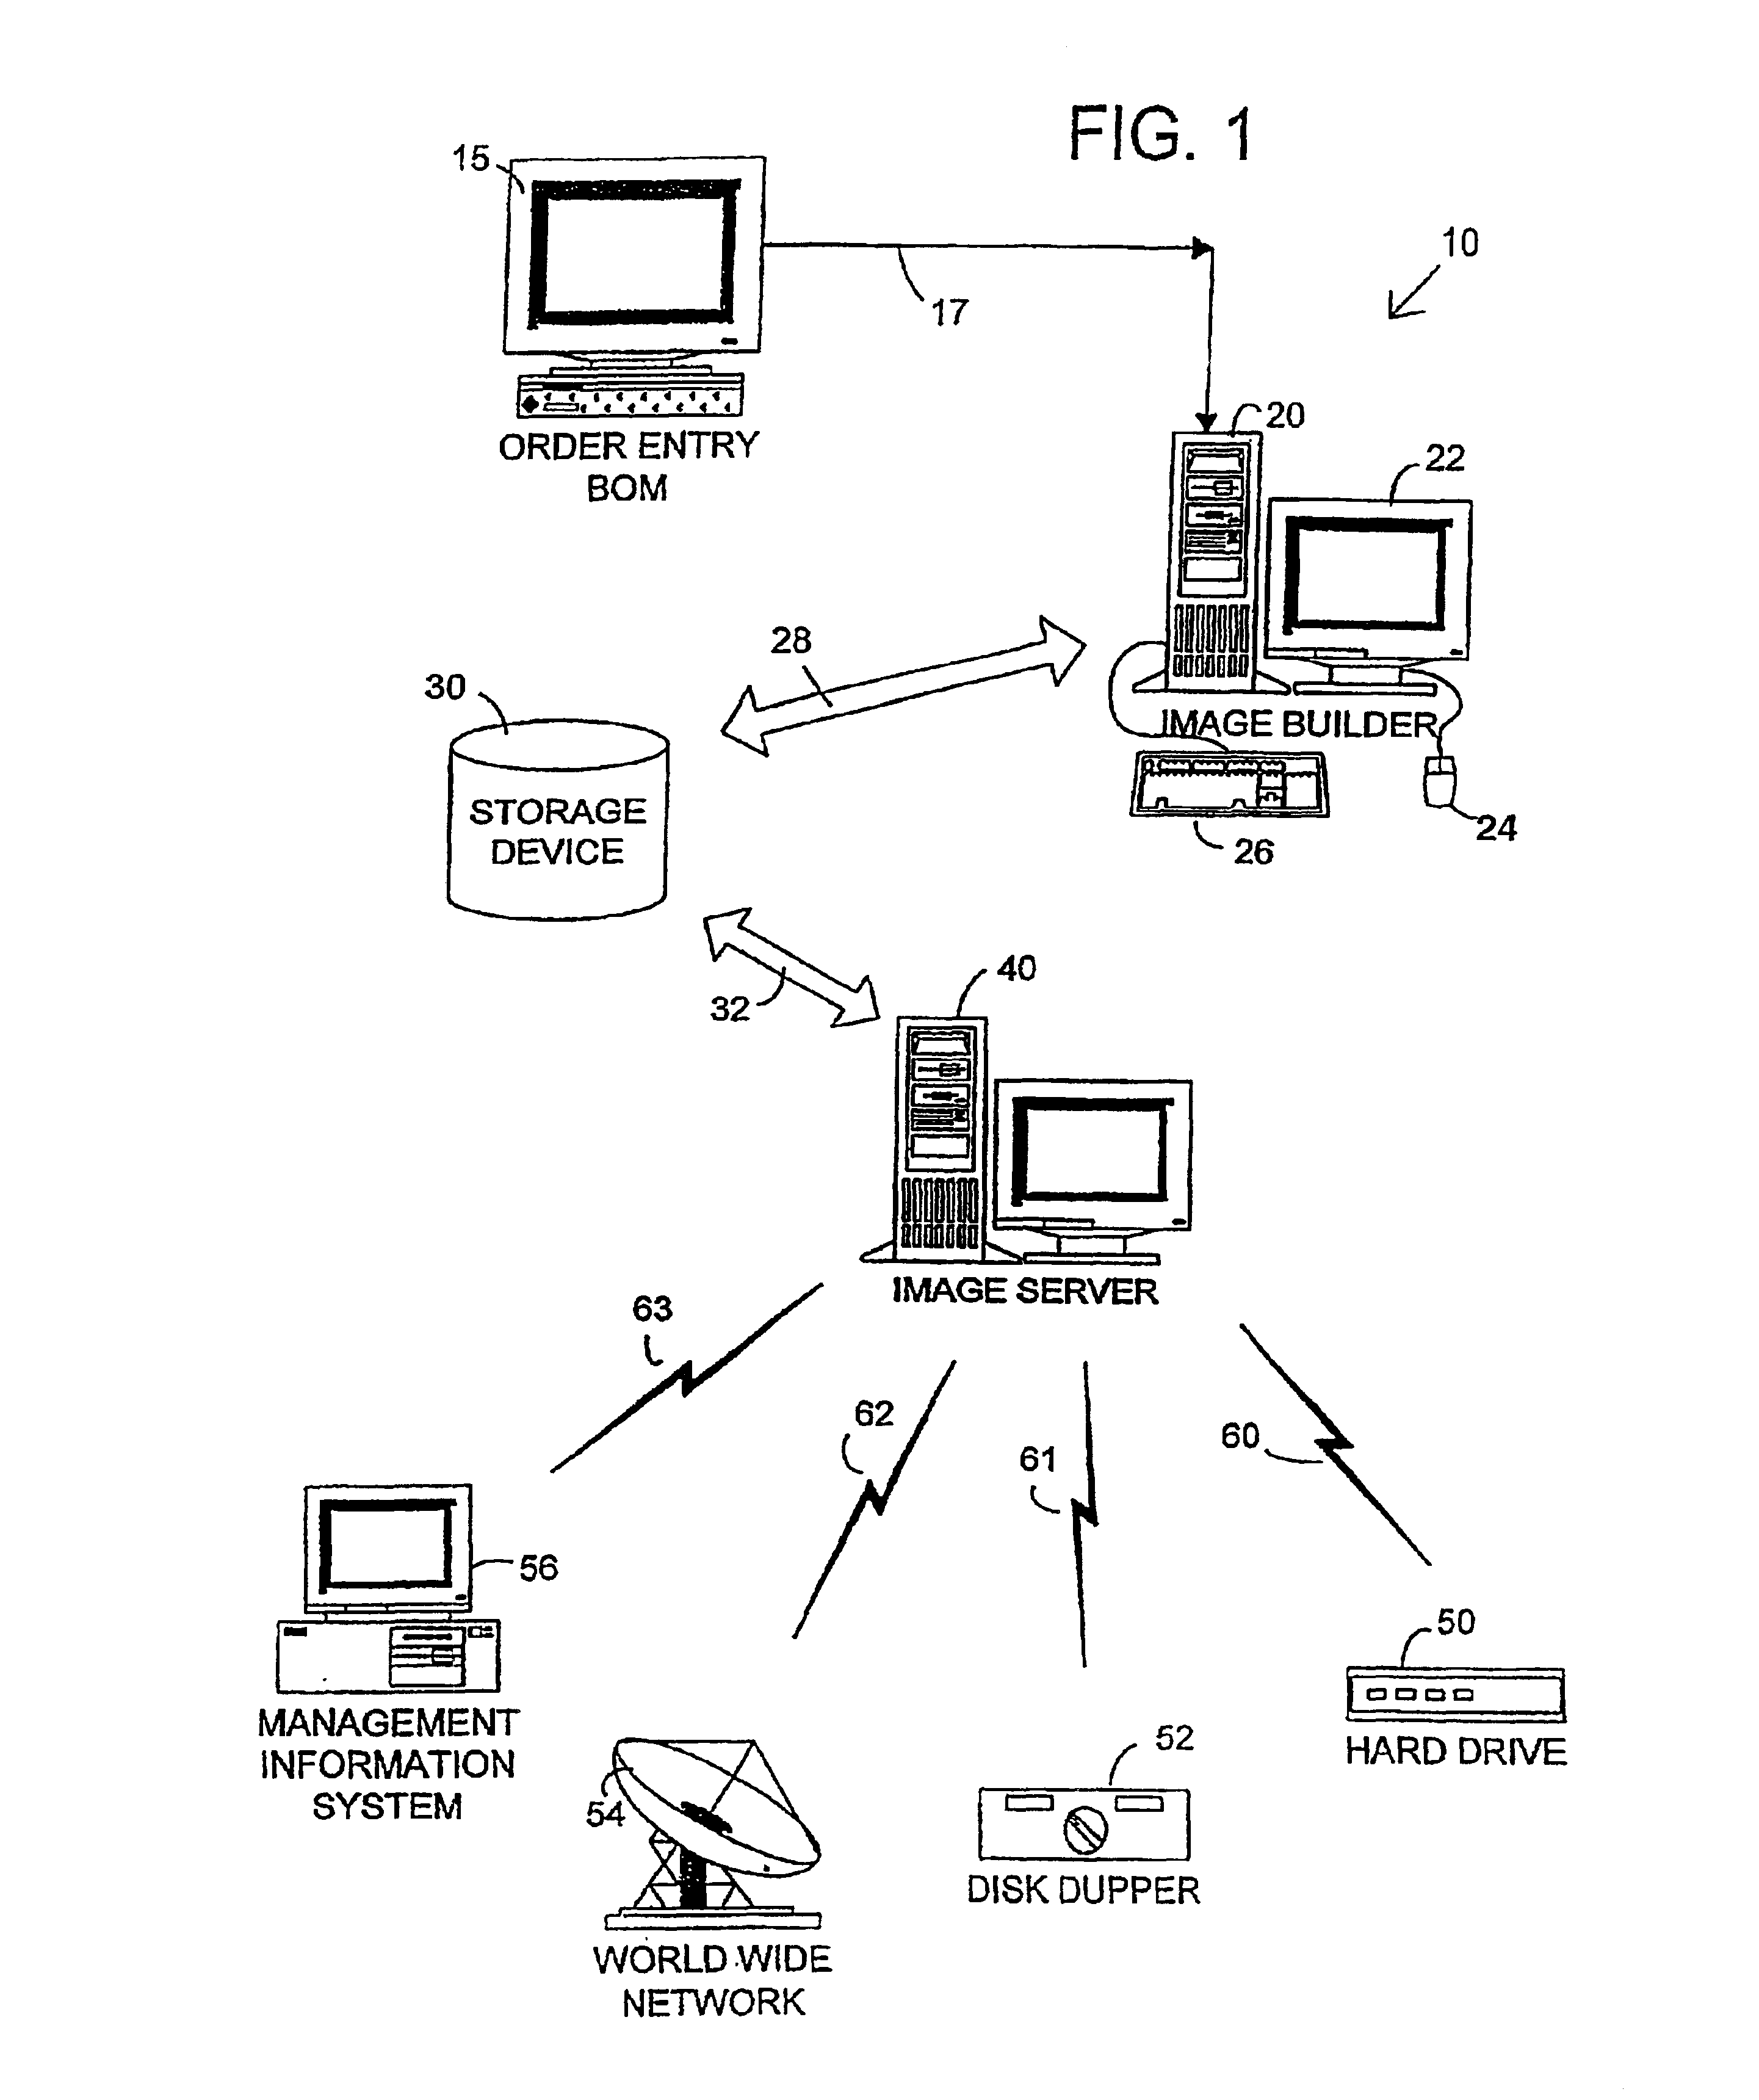 Method for configuring software for a build to order system